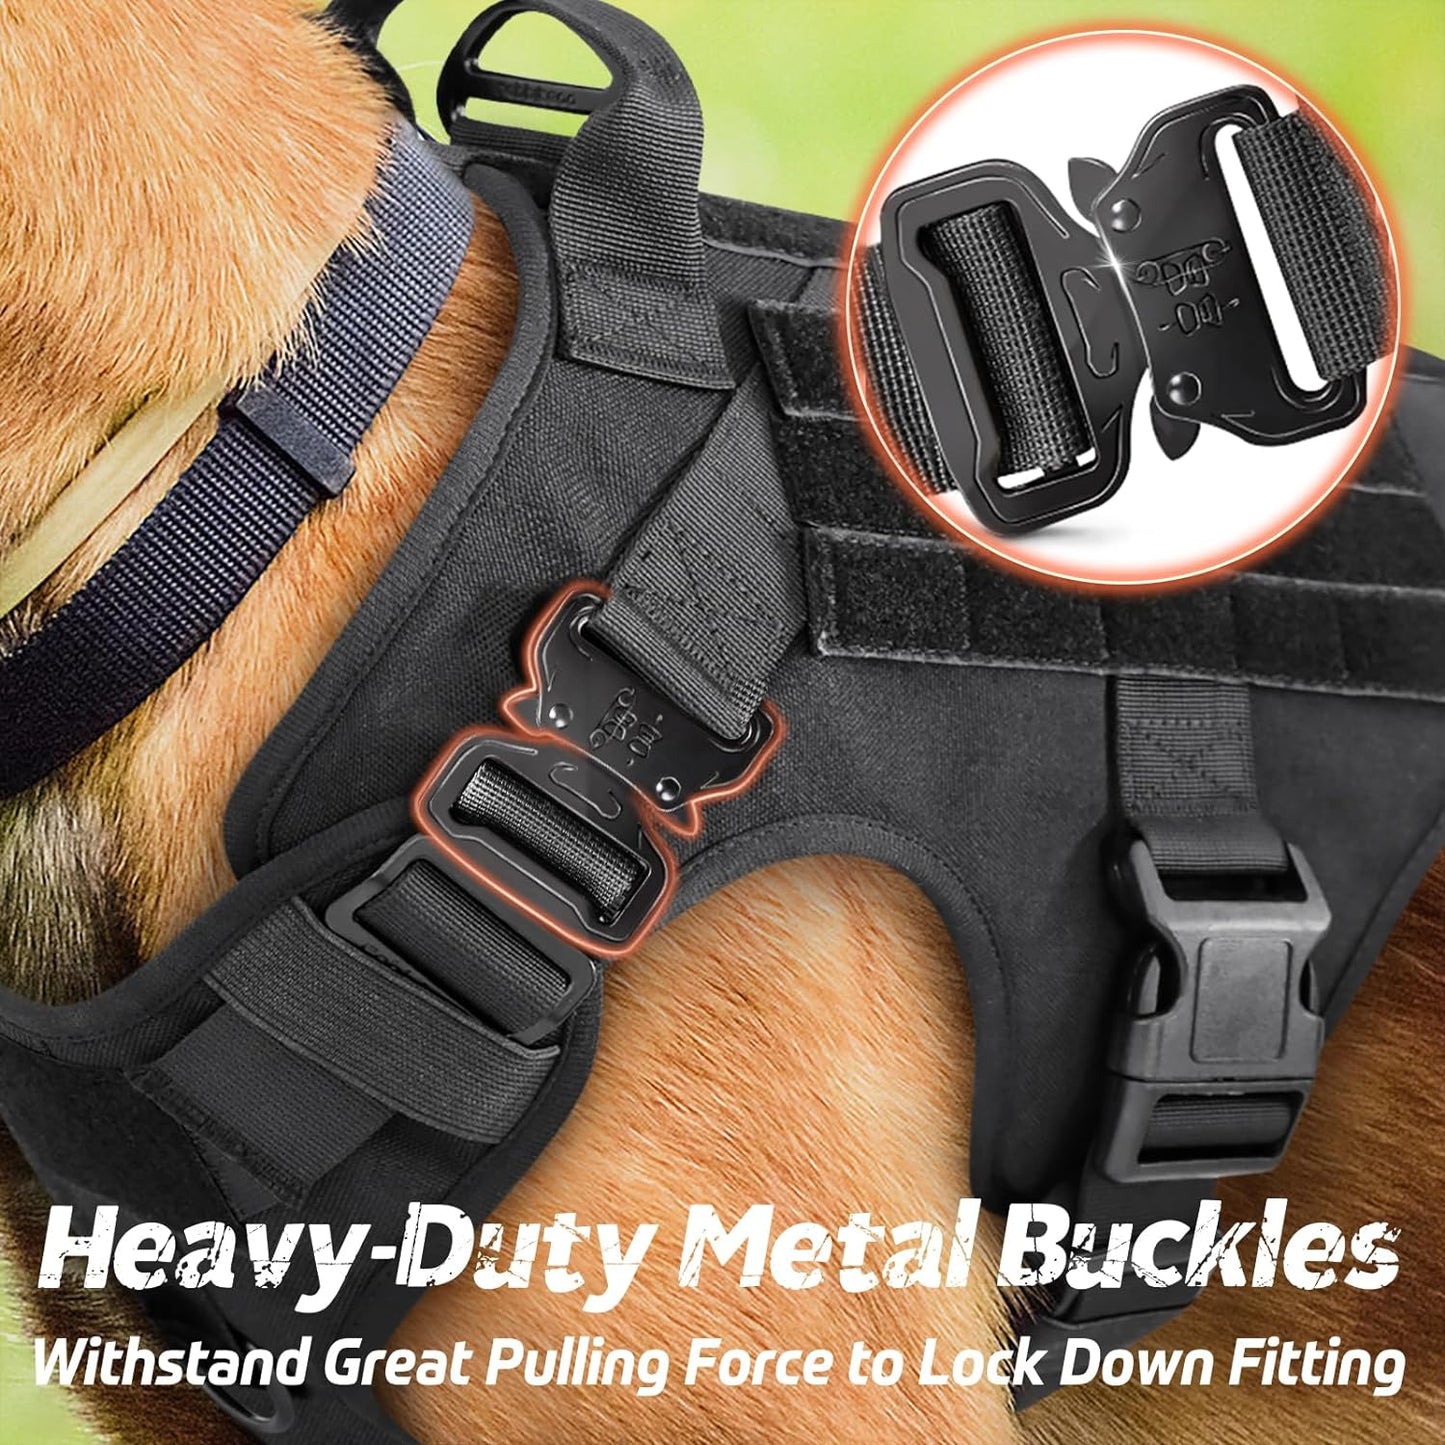 Tactical No Pull Dog Harness